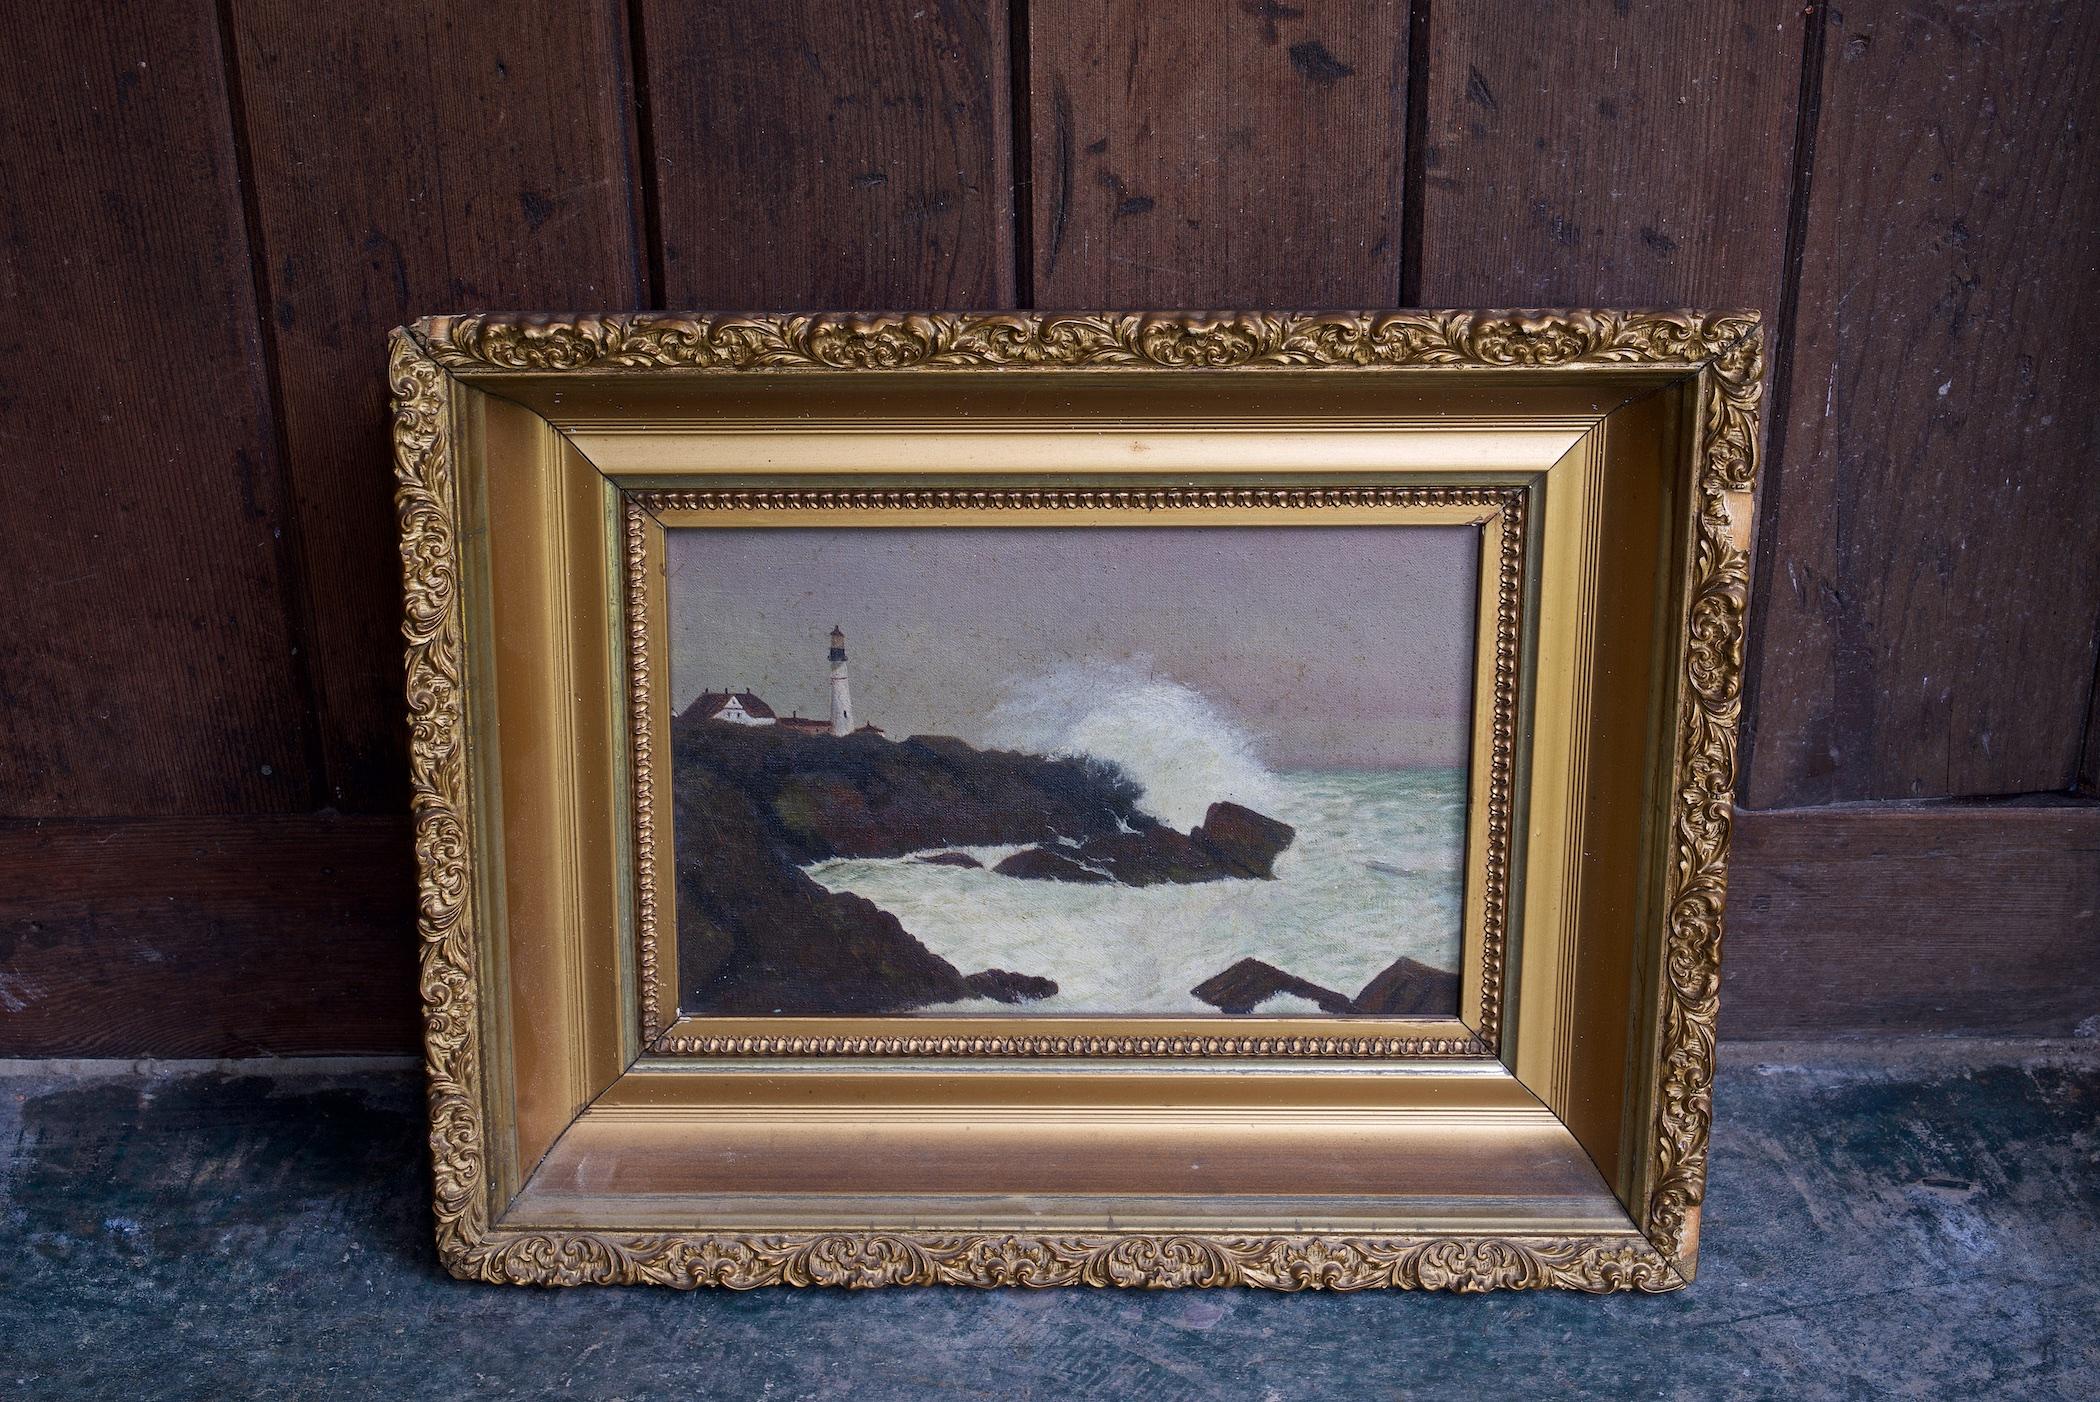 Unsigned Maritime oil painting. Very good quality, by the hand of a professional painter. The painting is soiled from 100 years of exposure. The frame has some losses (chips) to the gilt plastering.

Canvas without Frame W 12 x H 8 in.